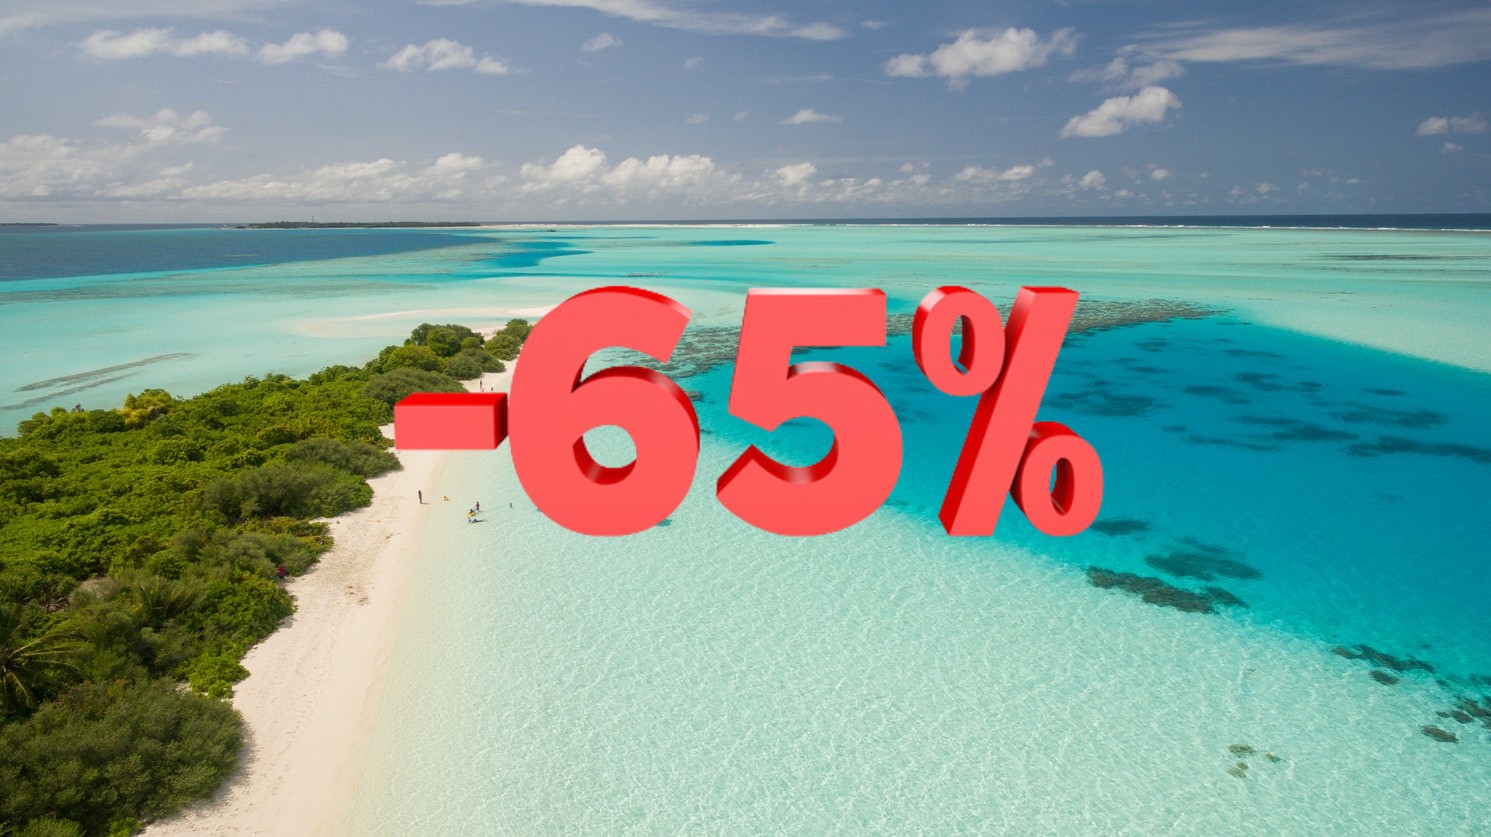 Caribbean beach and -65% in the middle